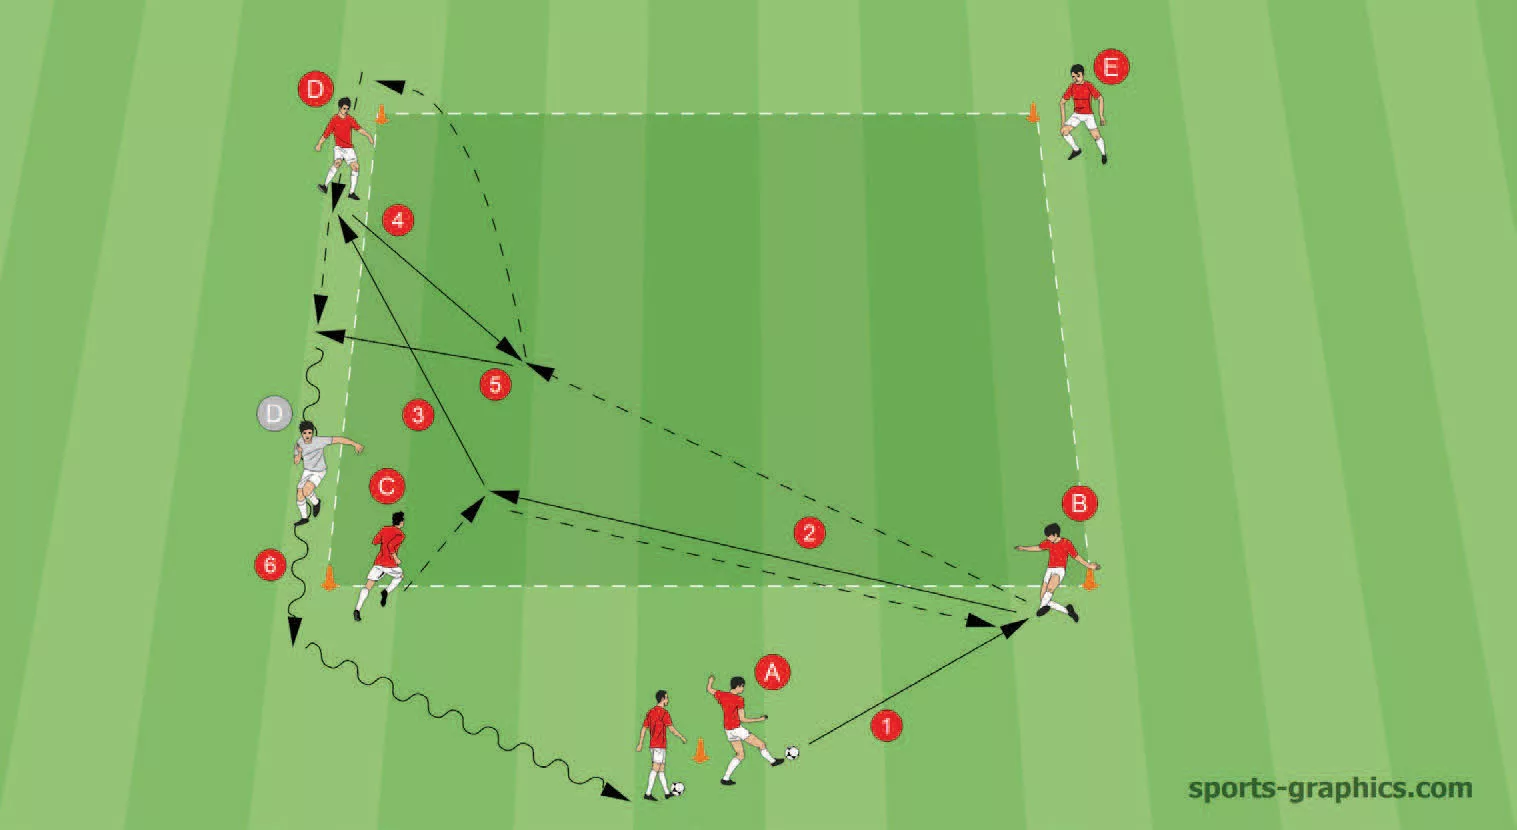 Passing Drill in a Square